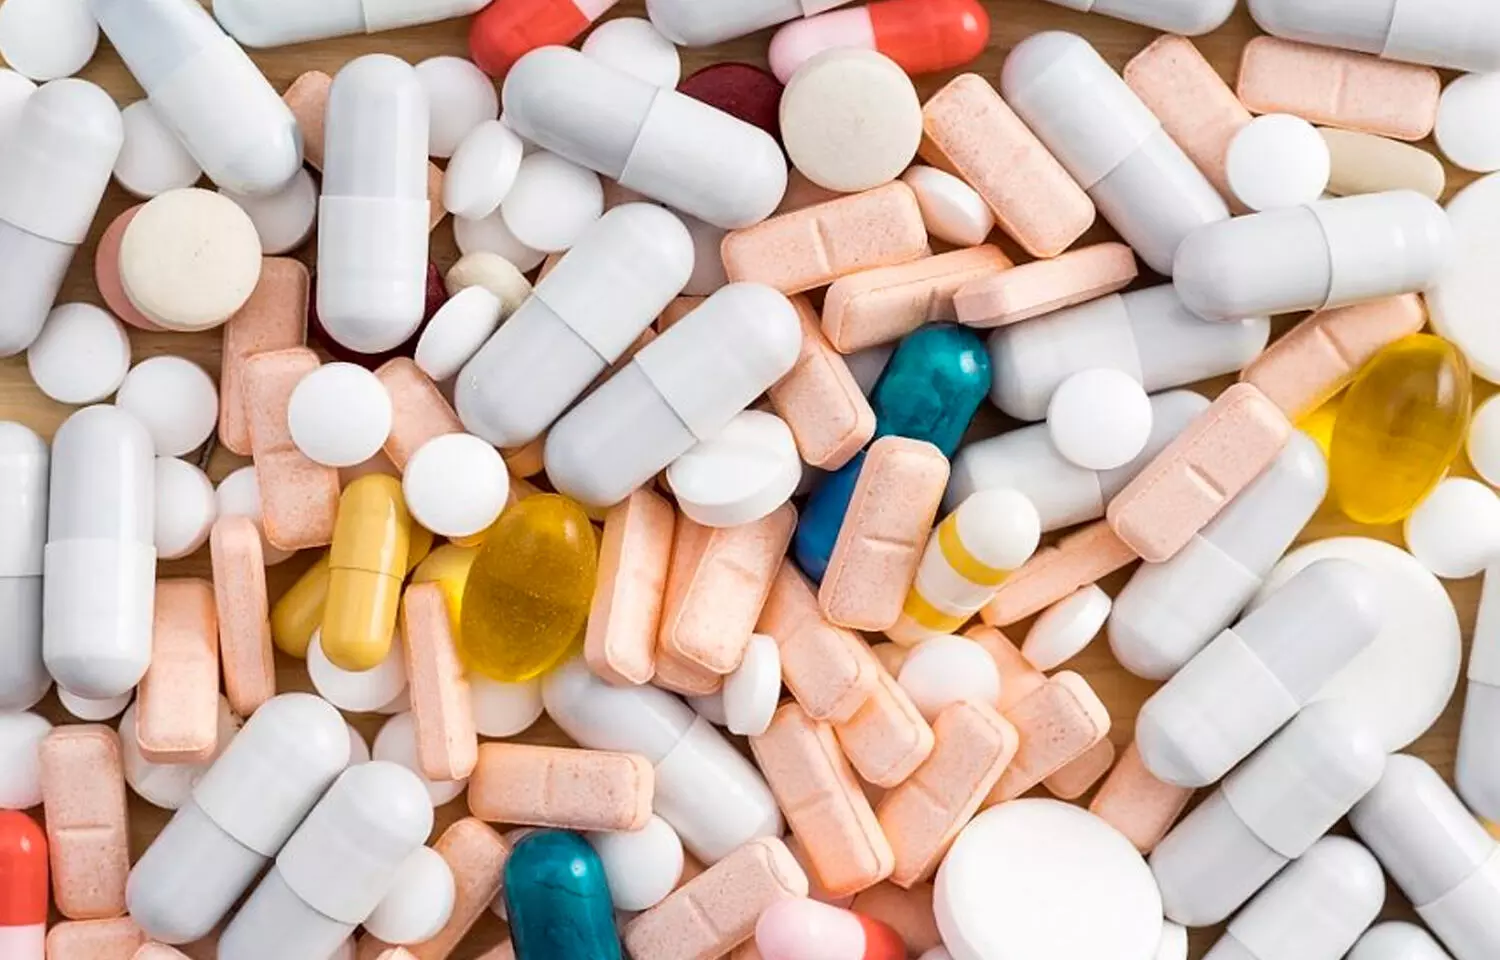 Govt to amend New Drugs and Clinical Trials Rules to add cell derived products as new drugs